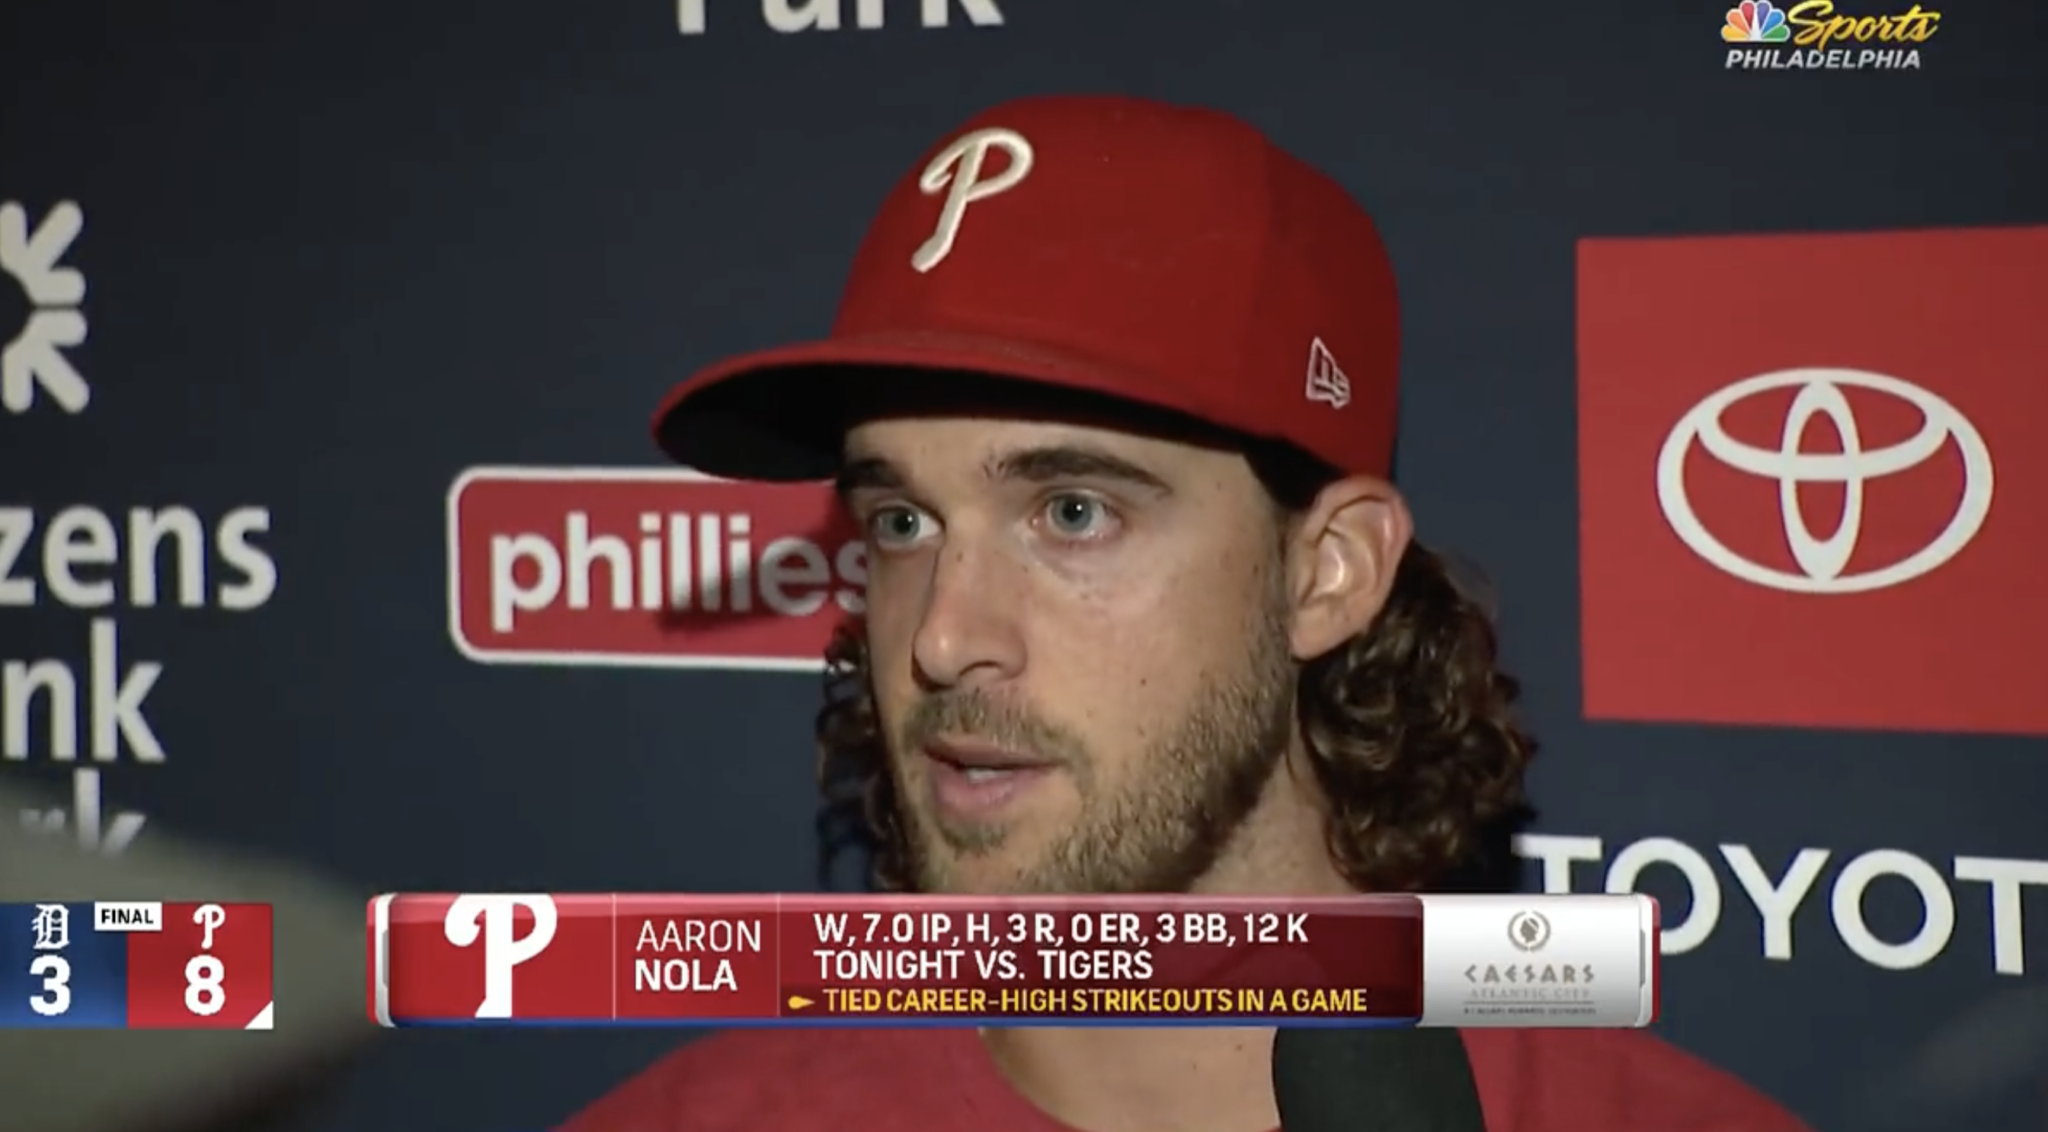 Aaron Nola Says the Pitch Clock “Was a Little Too Fast”